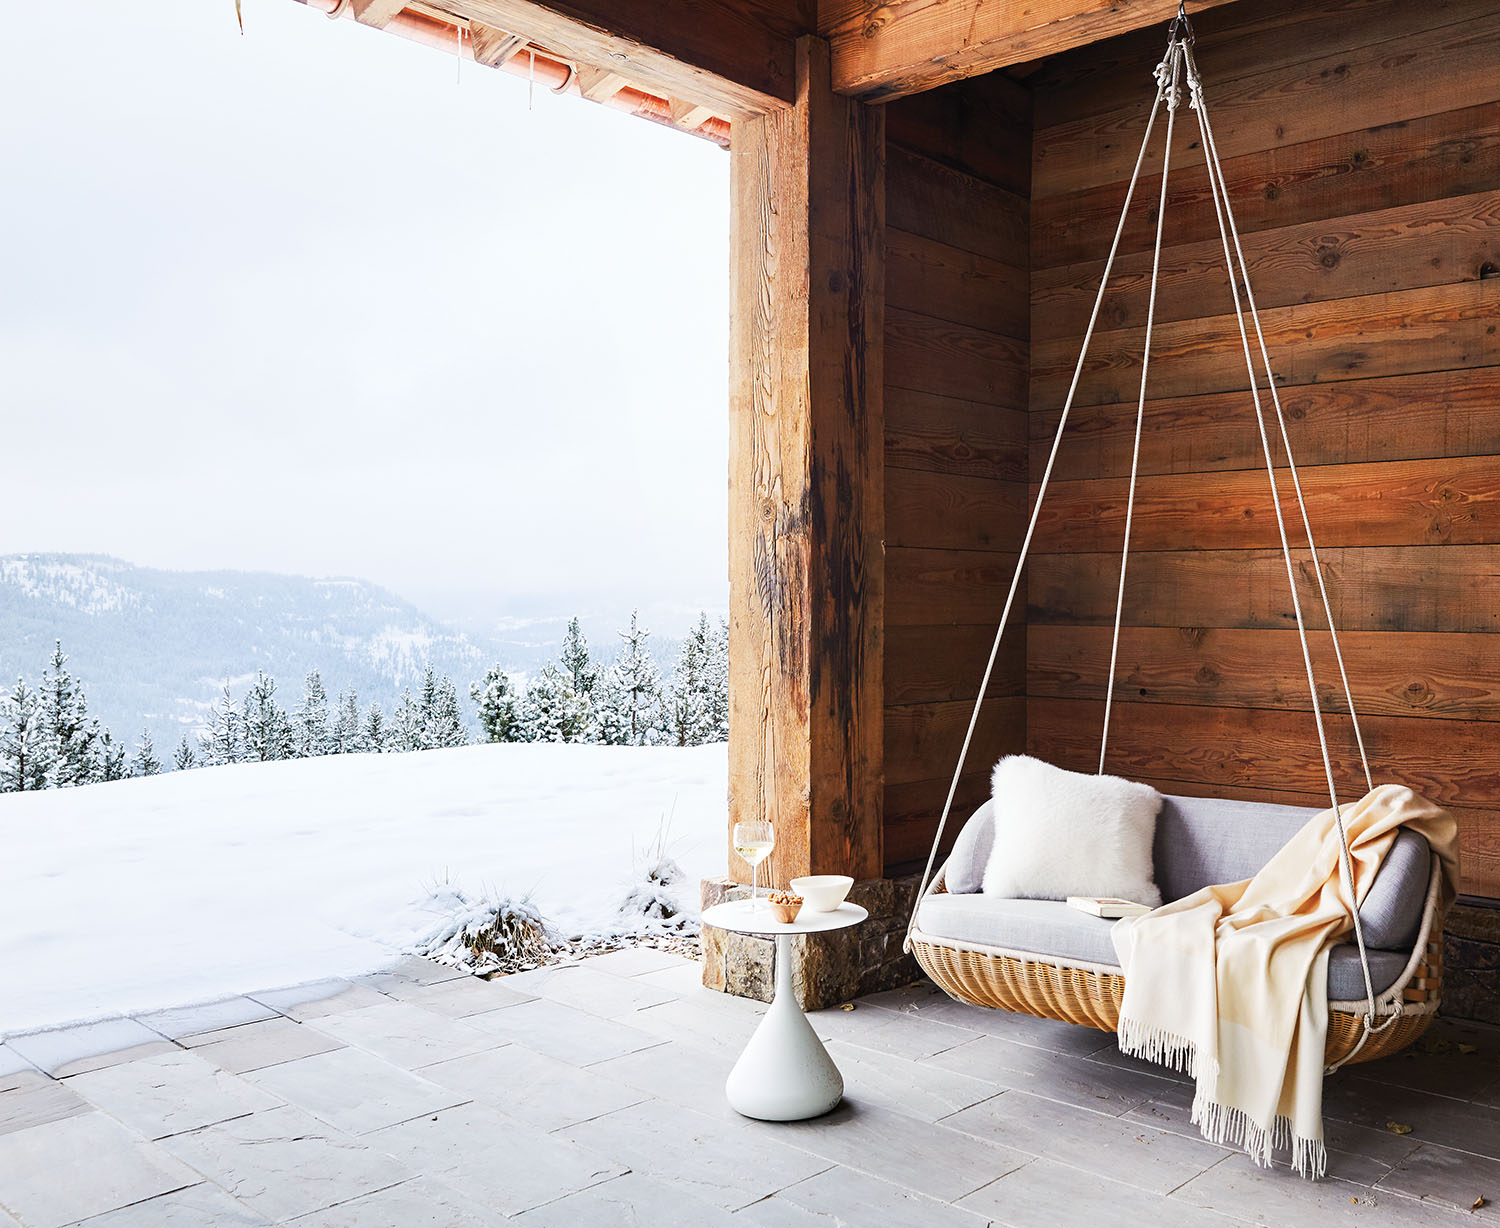 A cozy hanging seat on the deck looking over a snow covered mountain.